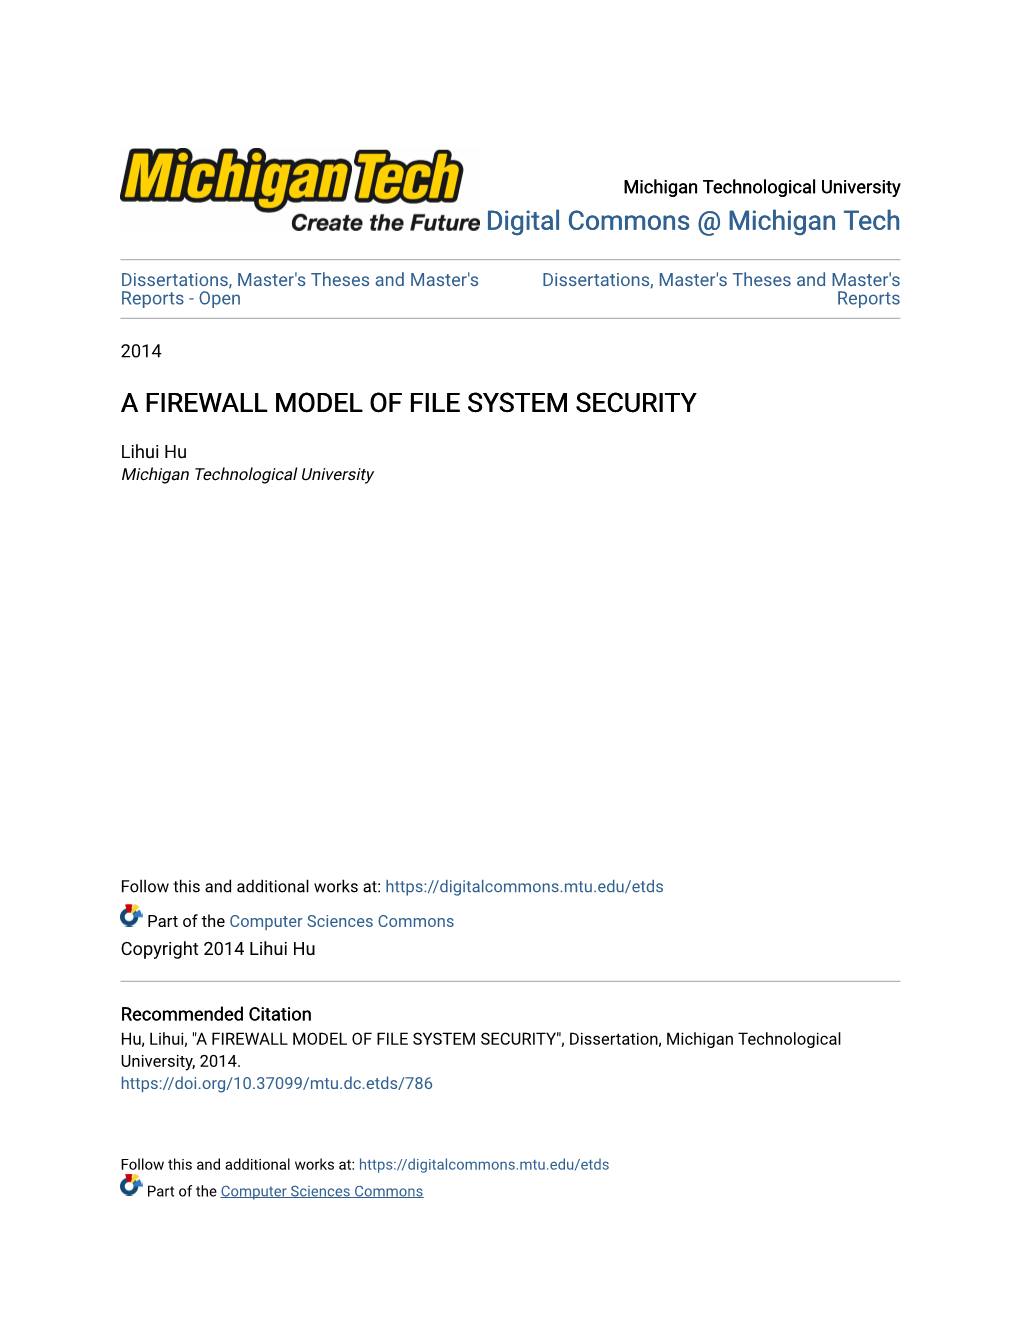 A Firewall Model of File System Security